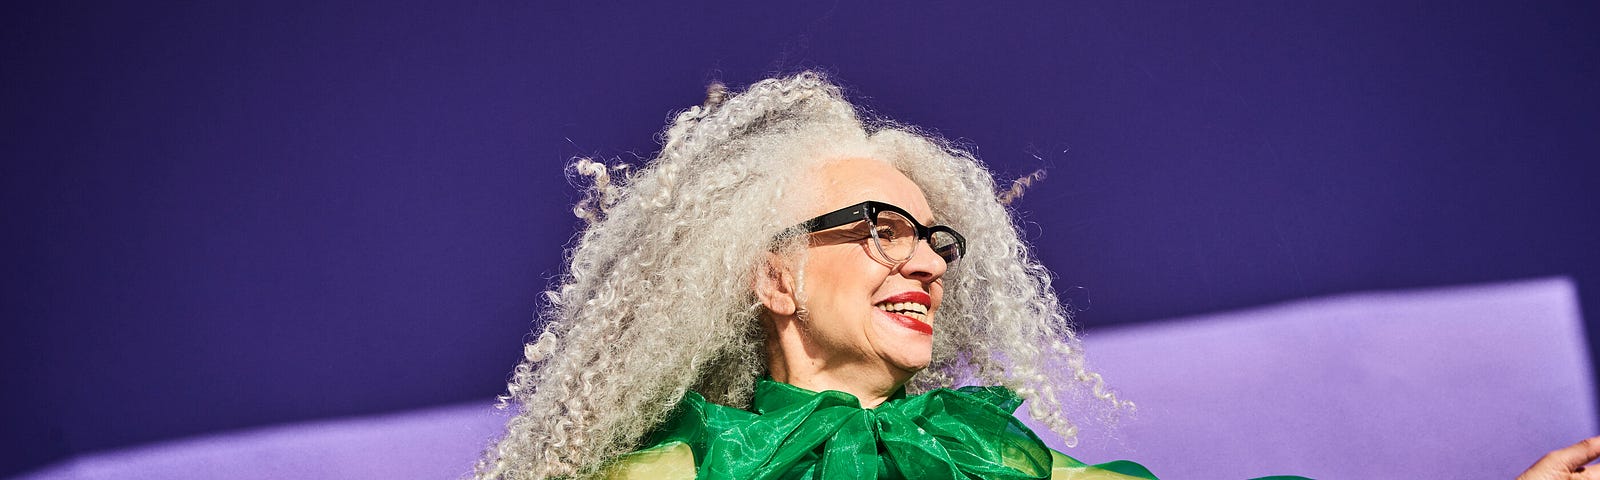 Portrait of a woman with gray curly hair and glasses wearing a green shirt against a purple background